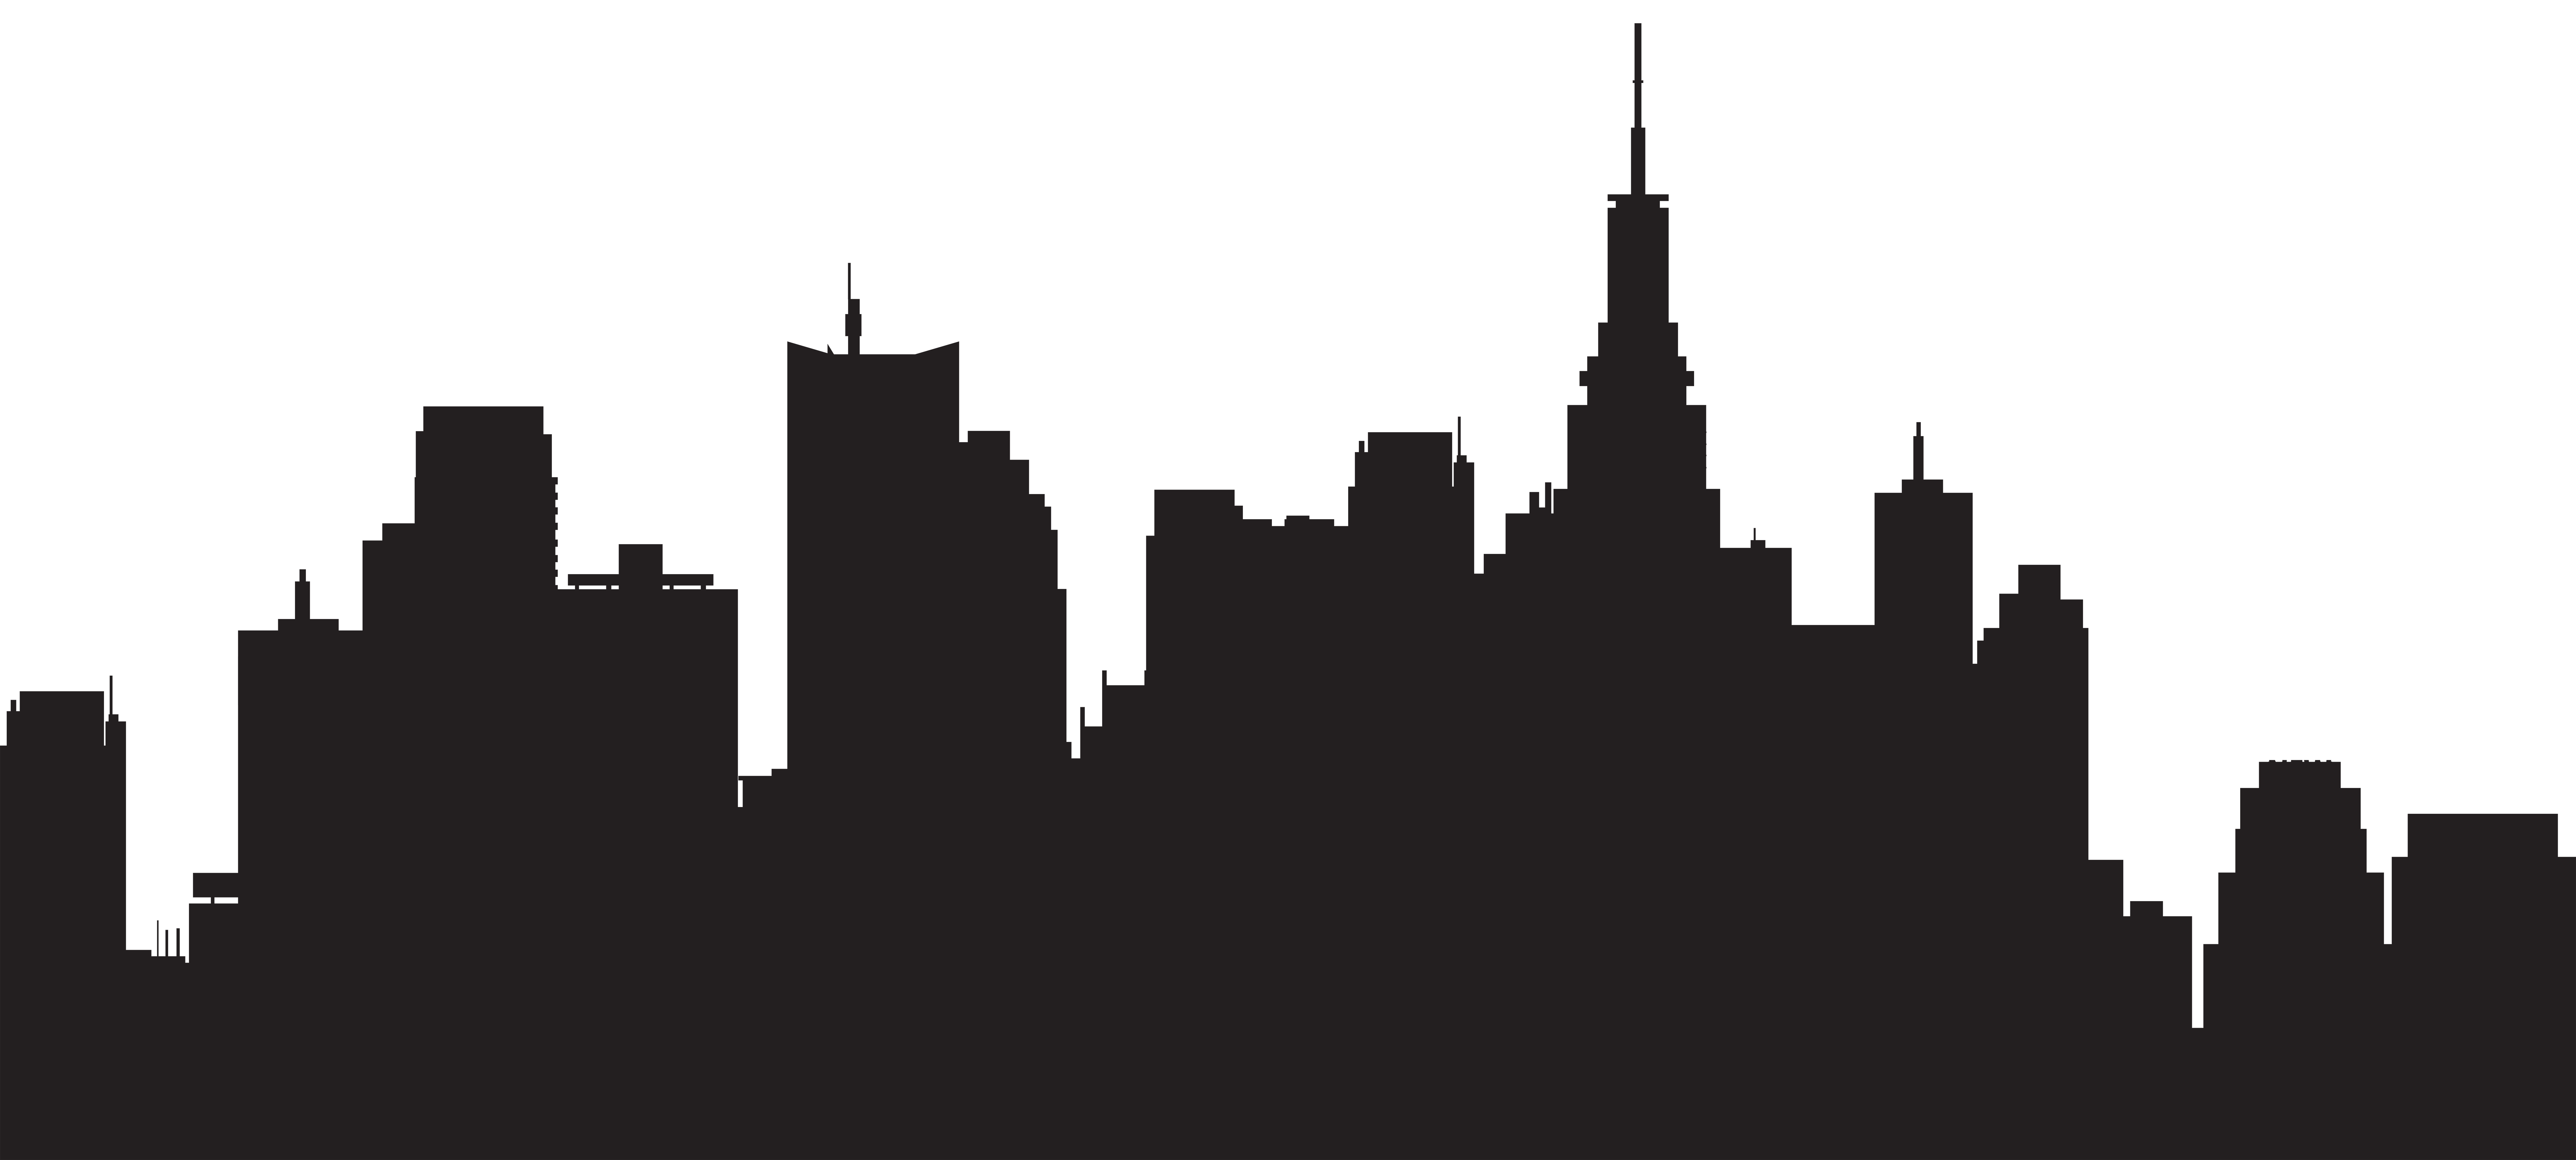 skyline clipart nyc drawing